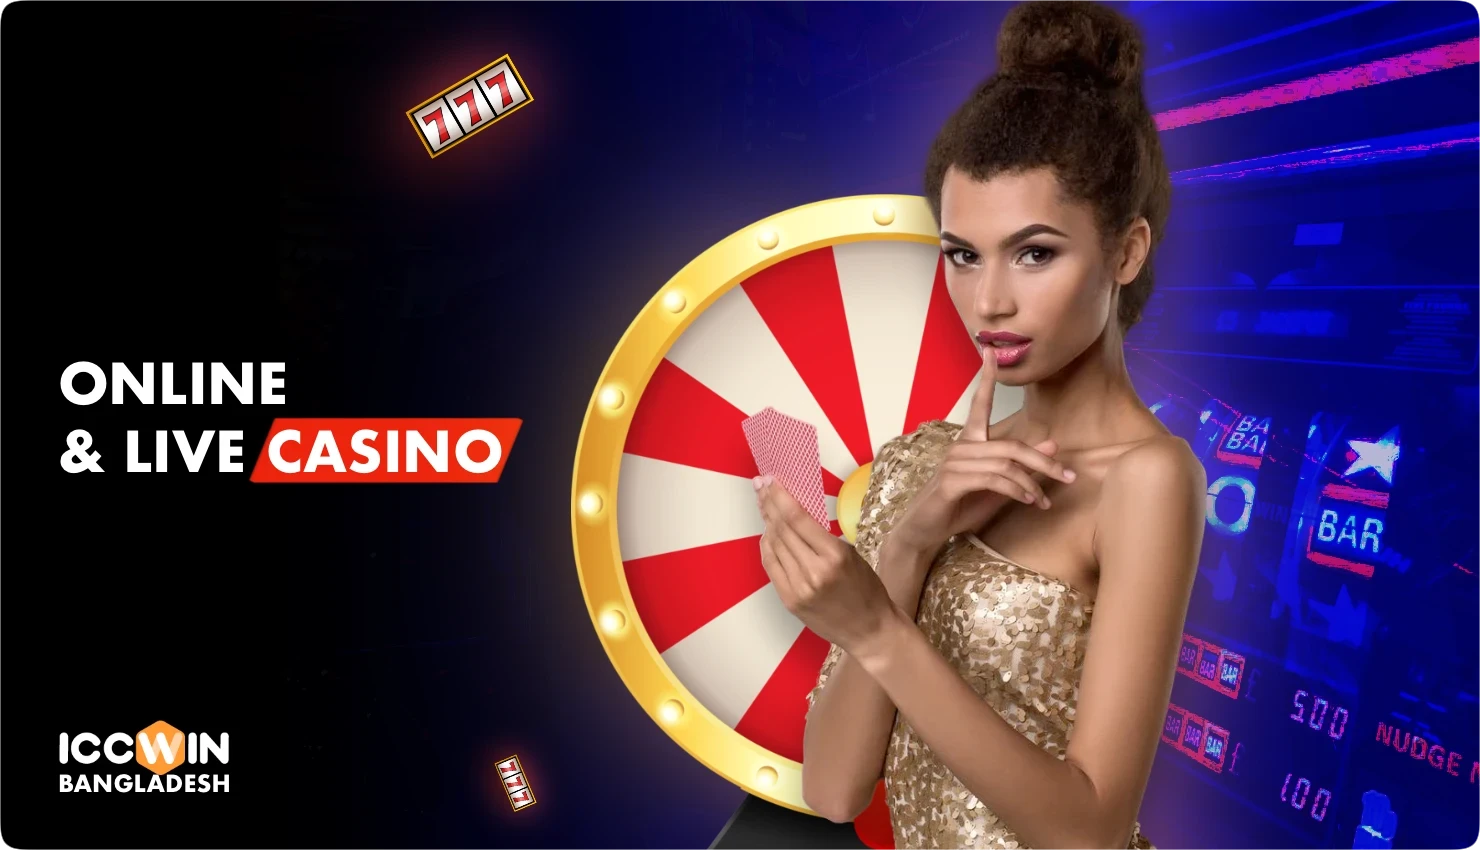 Iccwin online casino section with live dealers, slots, table games and lotteries